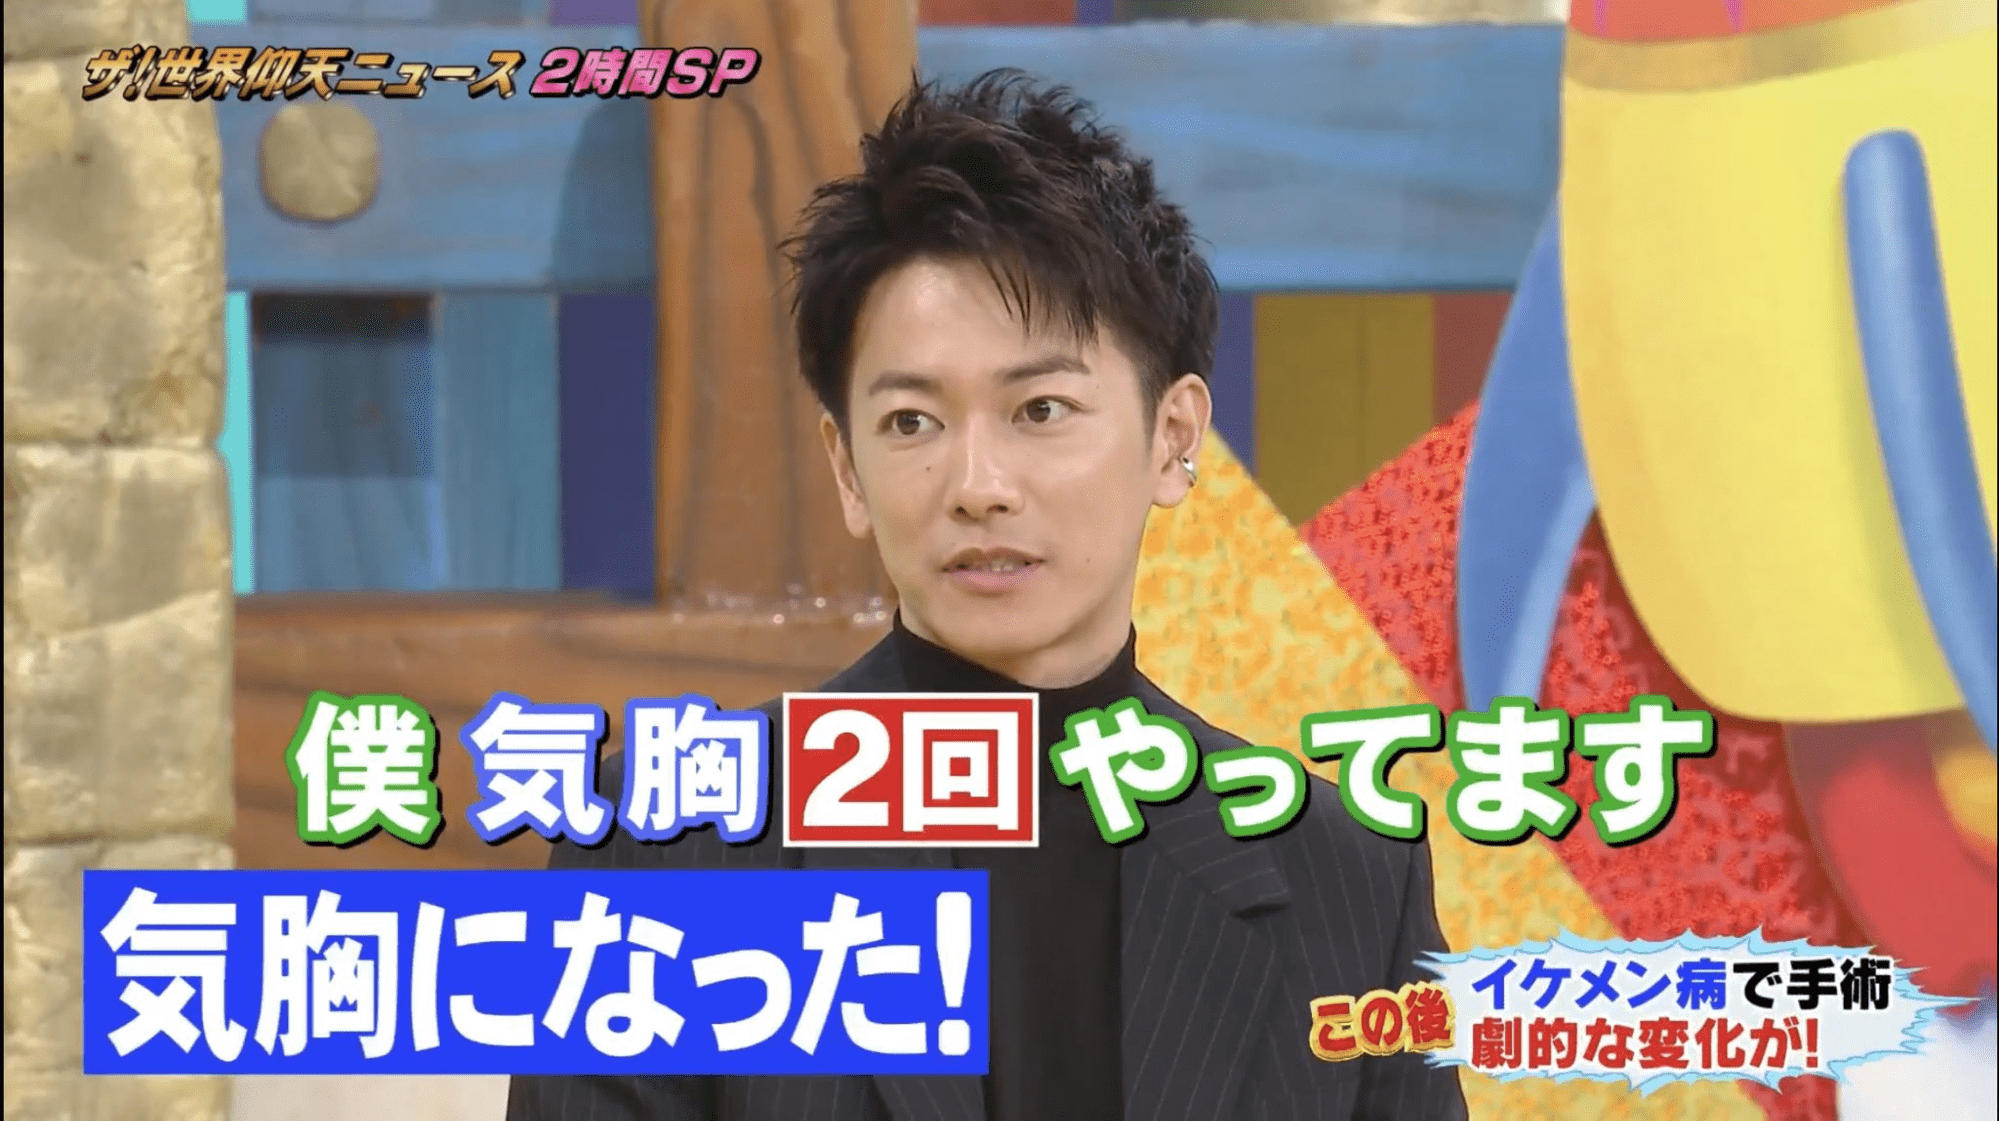 Takeru Satoh Facts - Takeru Satoh as a guest on Japanese TV show The World's Astonishing News!